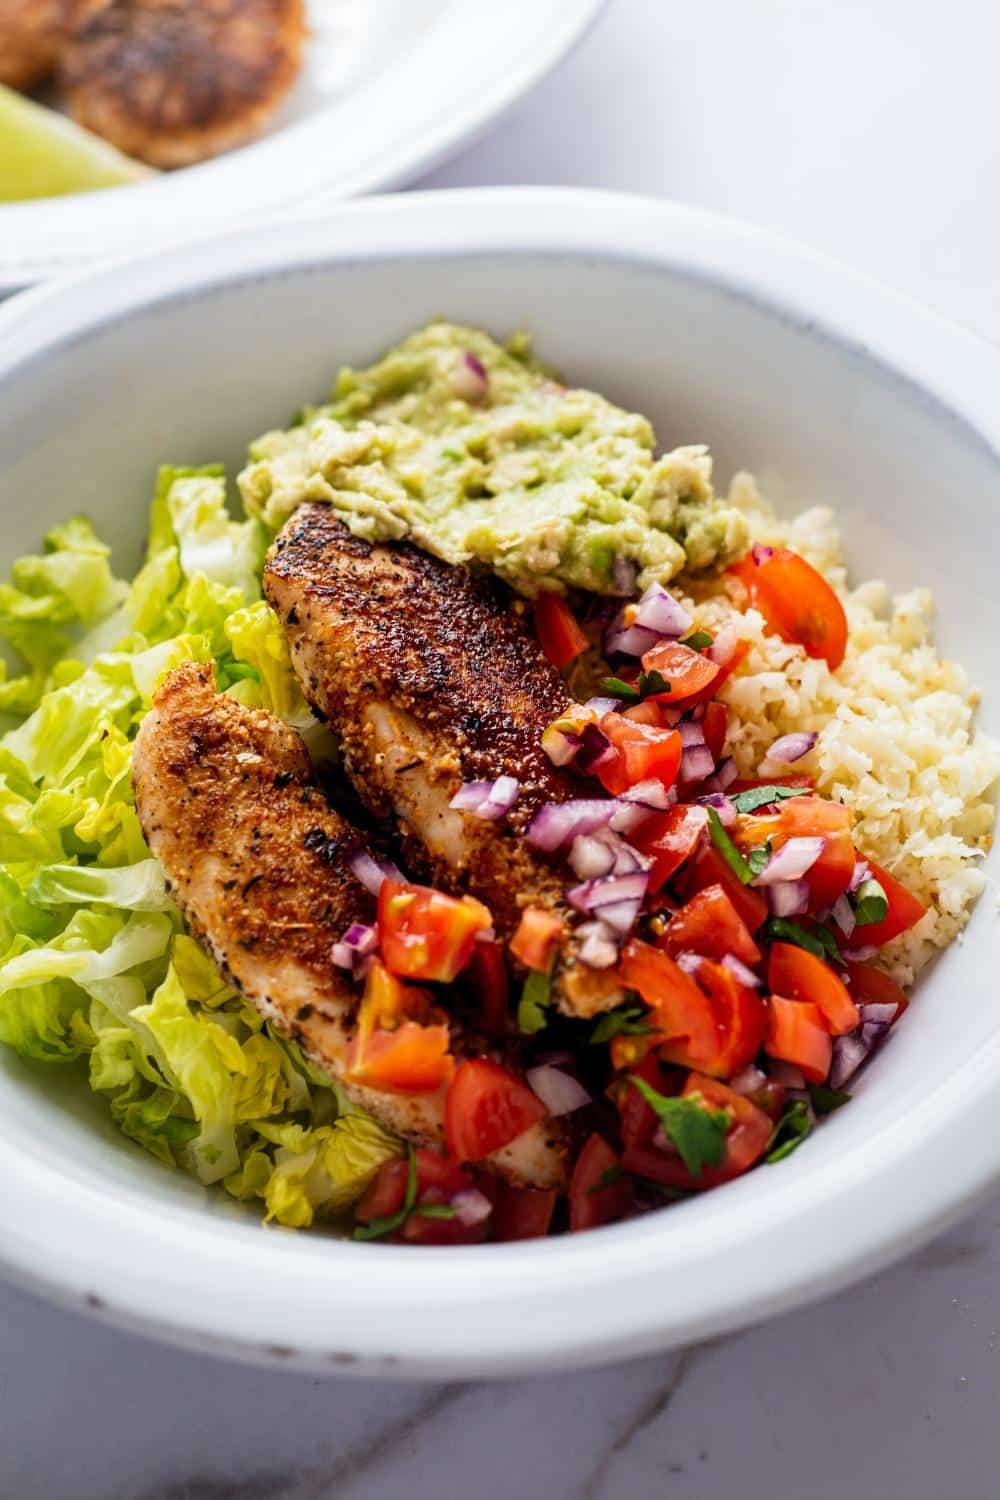 Chicken breasts, pico, lettuce, and guac with cauliflower rice in a bowl.